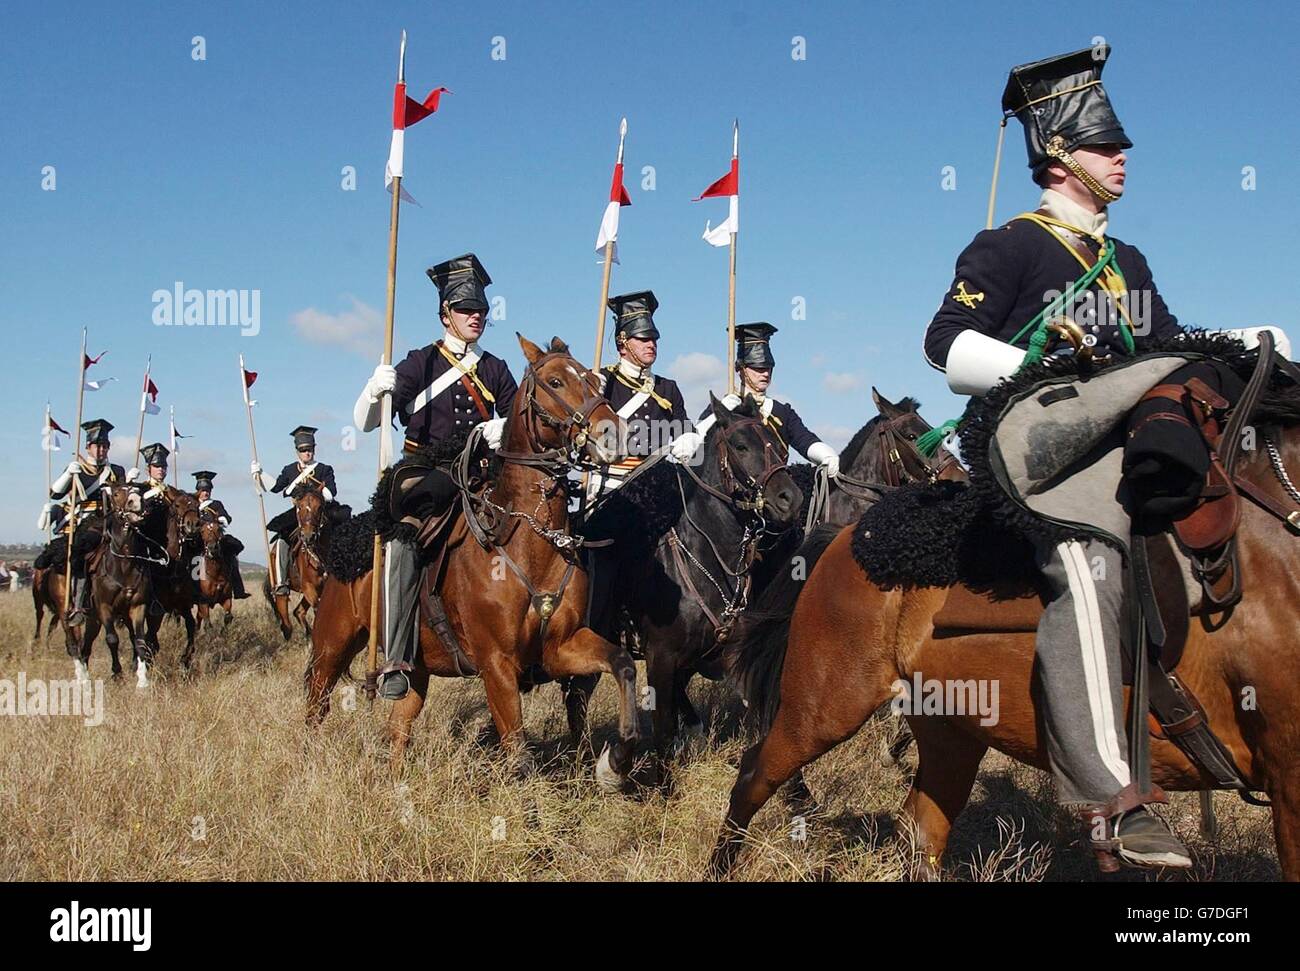 A re-enactment of the 17th Lancers 'Charge of The Light Brigade' through The Valley of Death wearing Drill Order of Brigade in The Crimea, Ukraine. The 150th Anniversary of the famous battle is tomorrow. Stock Photo